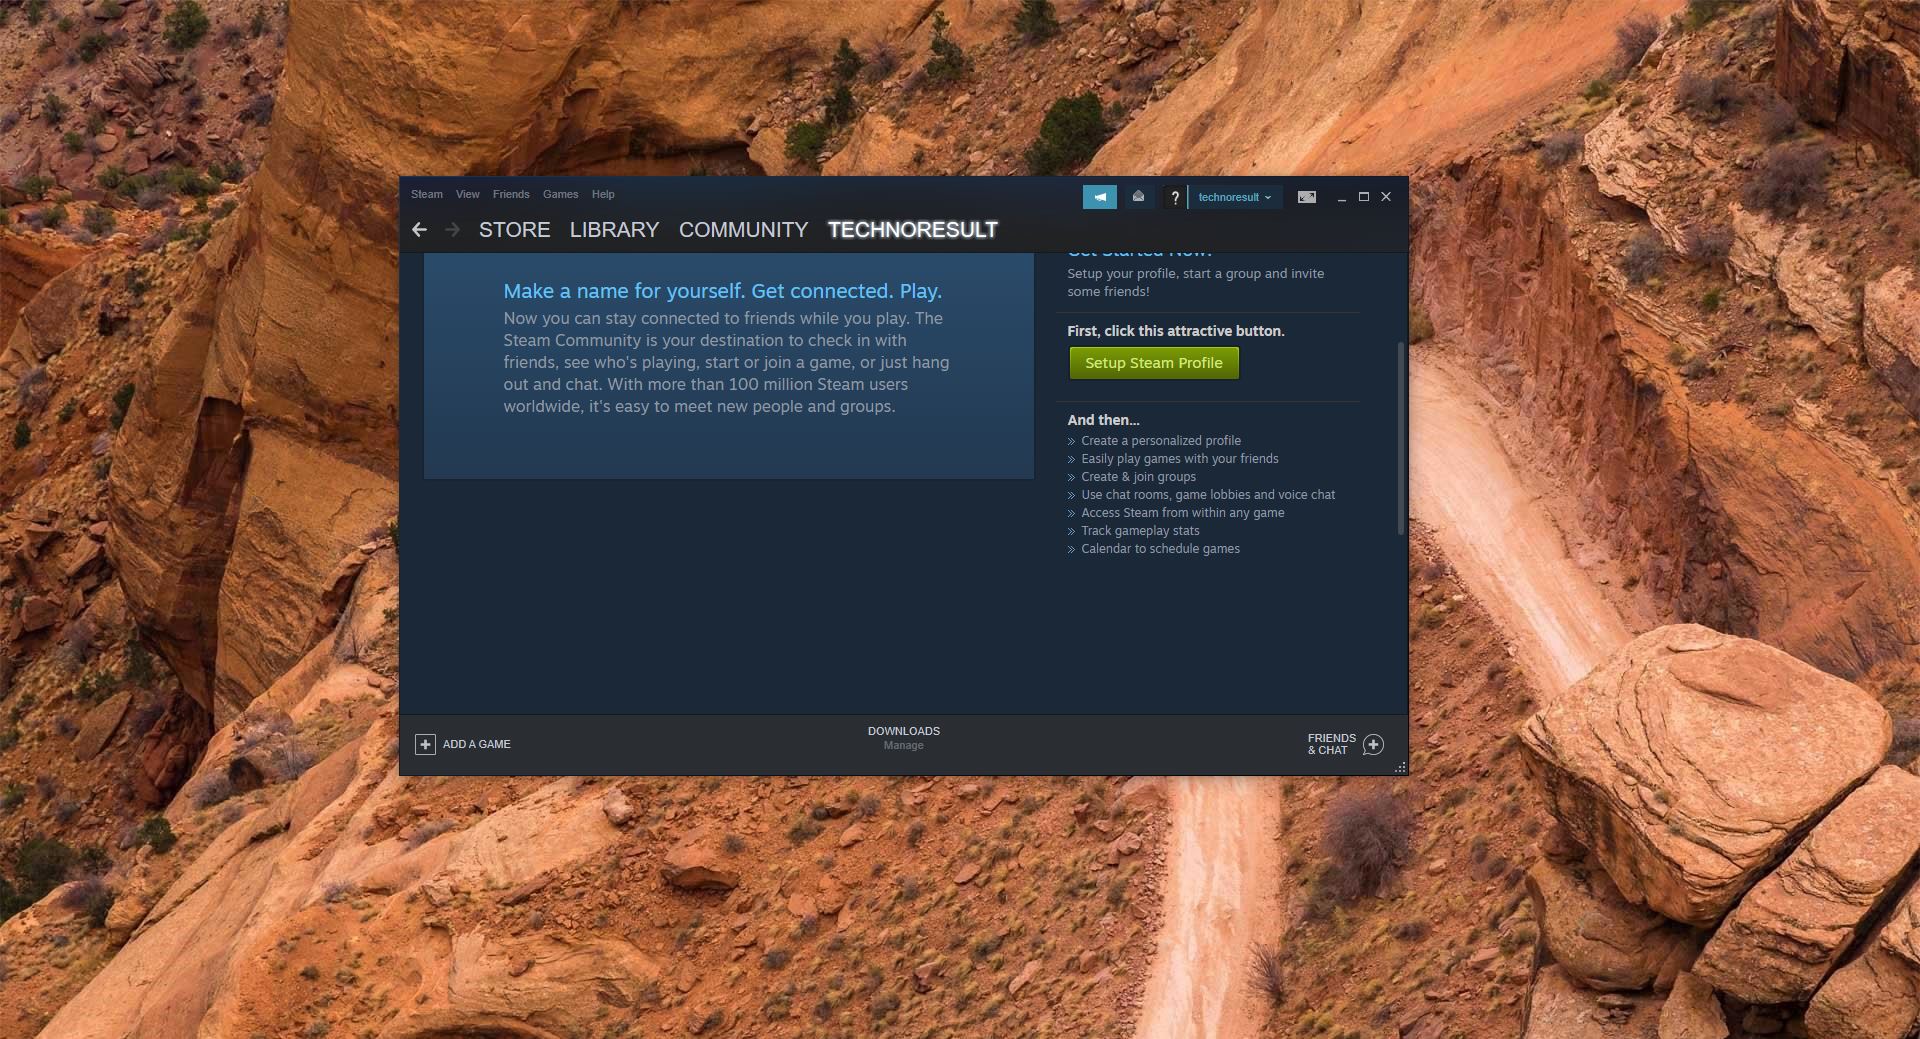 How to Stop Steam Launching Automatically in Windows 10?